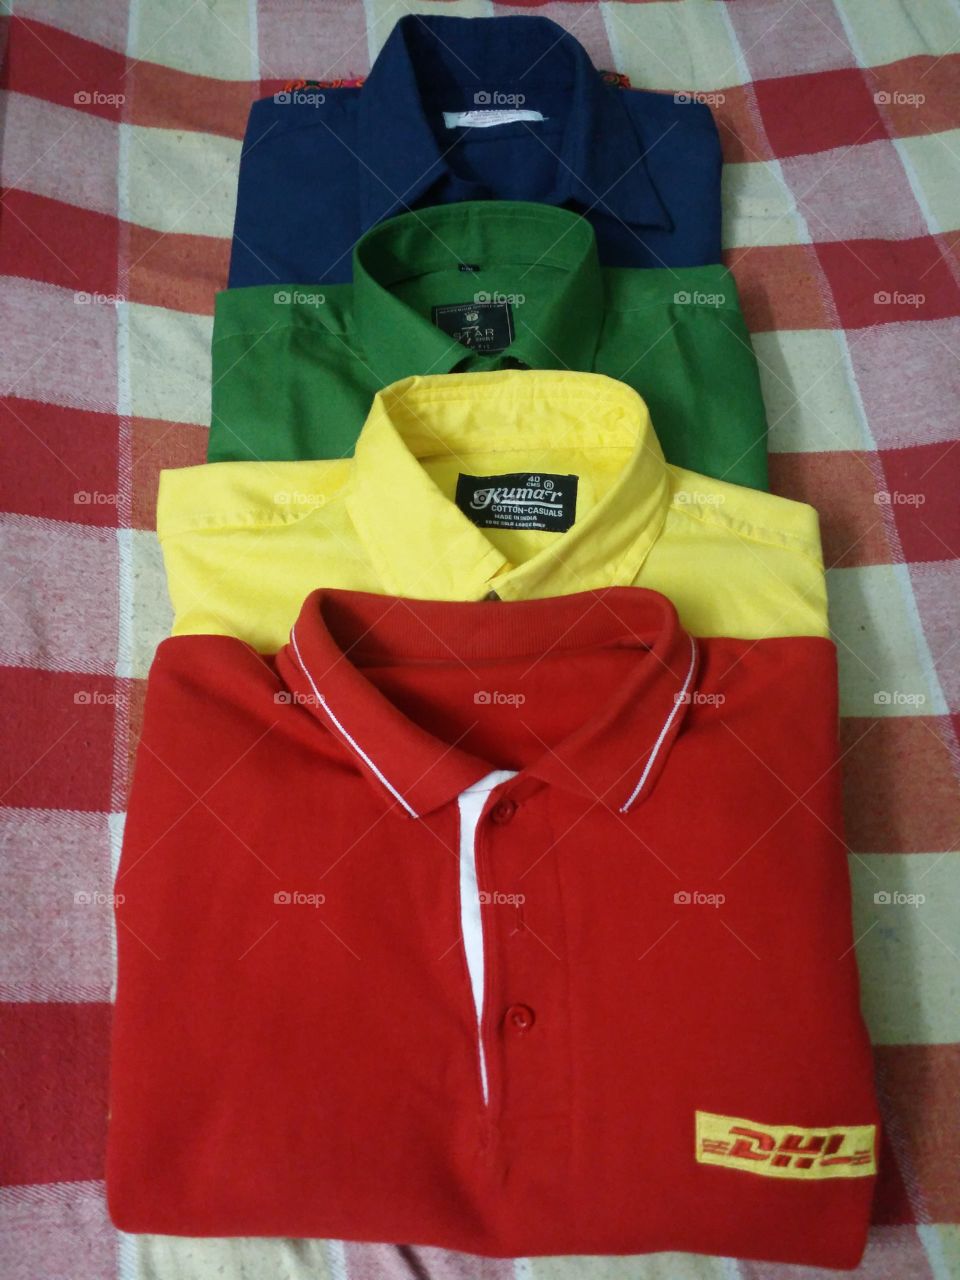 Shirts and t shirt colore clash